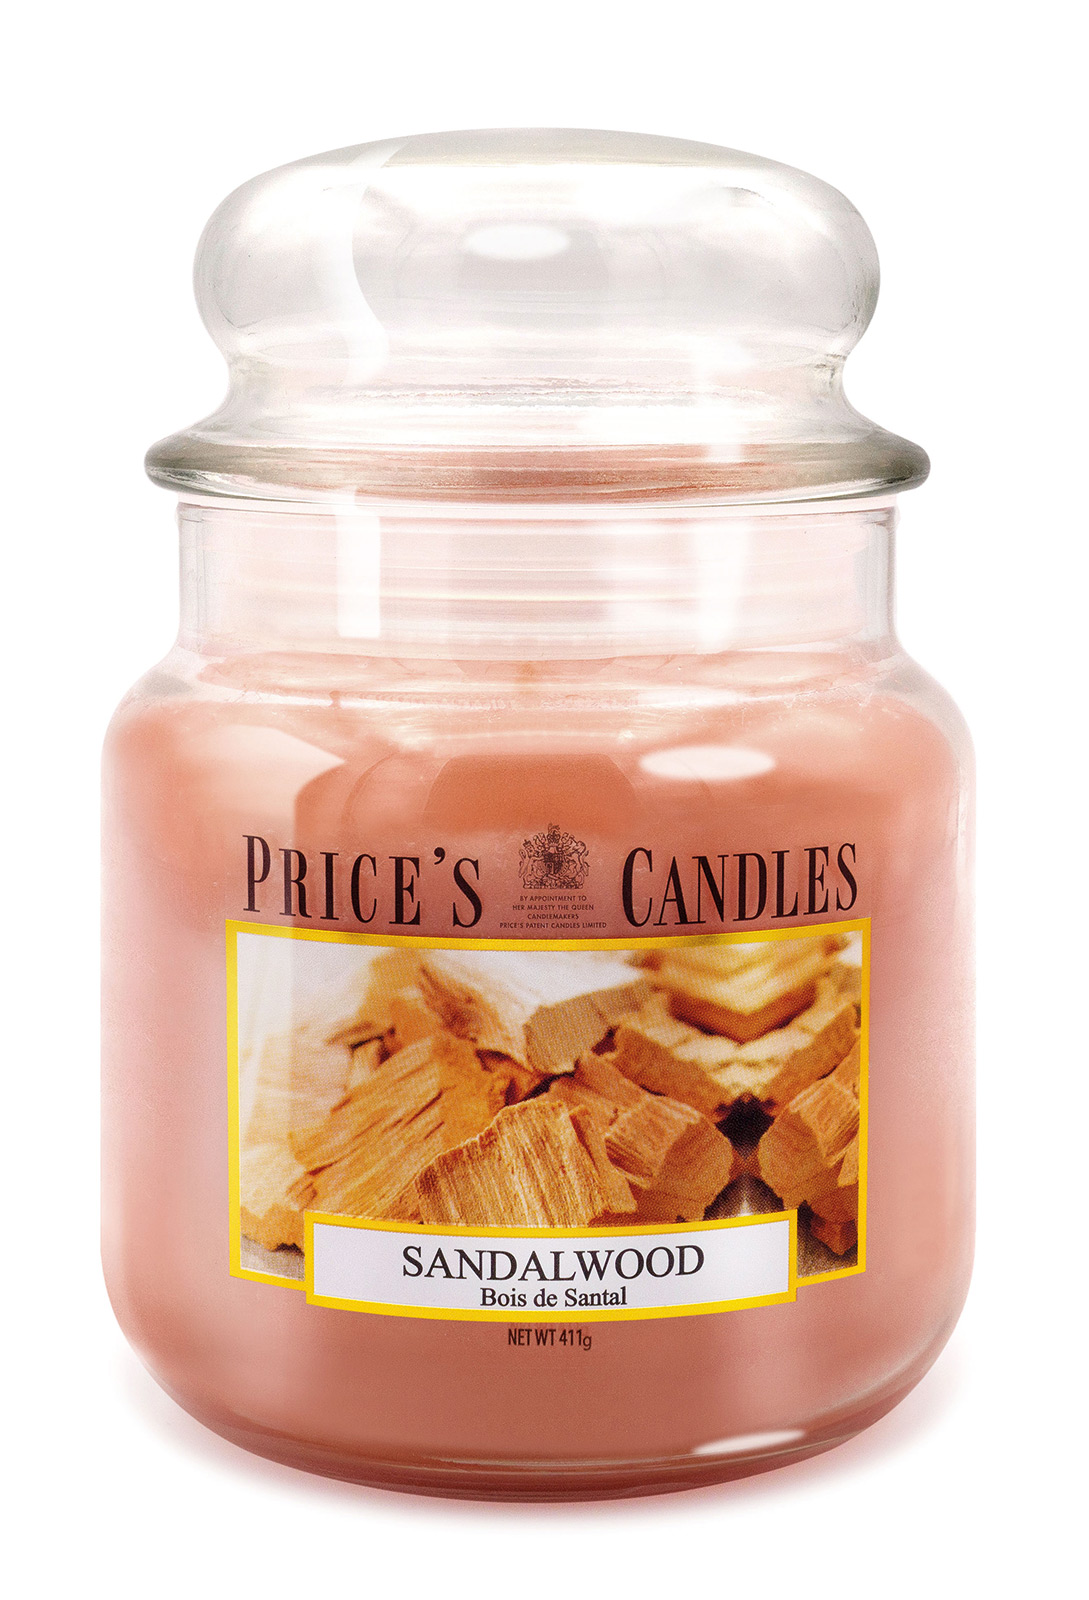 Prices Candle "Sandalwood" 411g